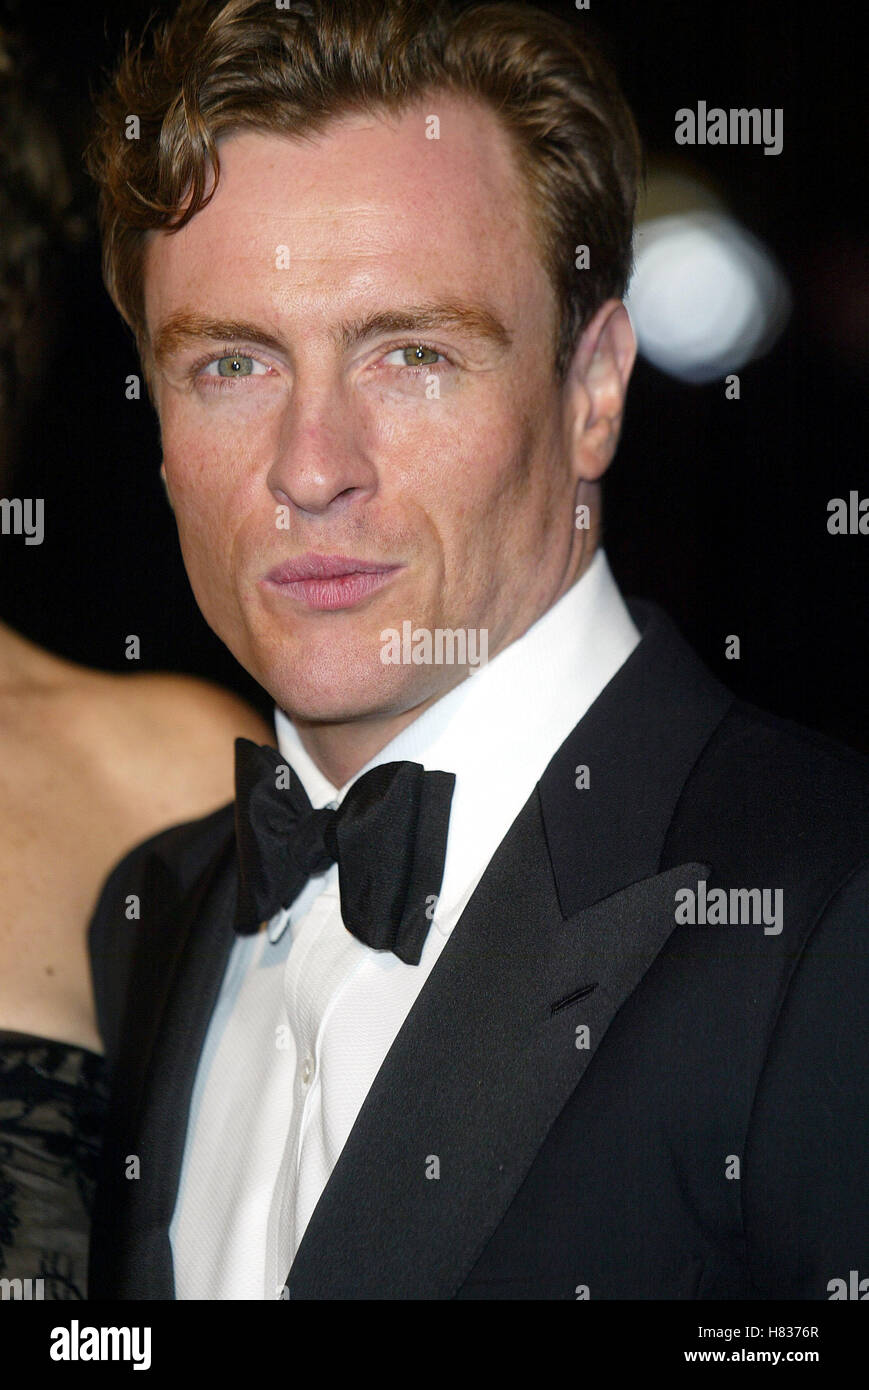 Toby Stephens by Lucony on DeviantArt